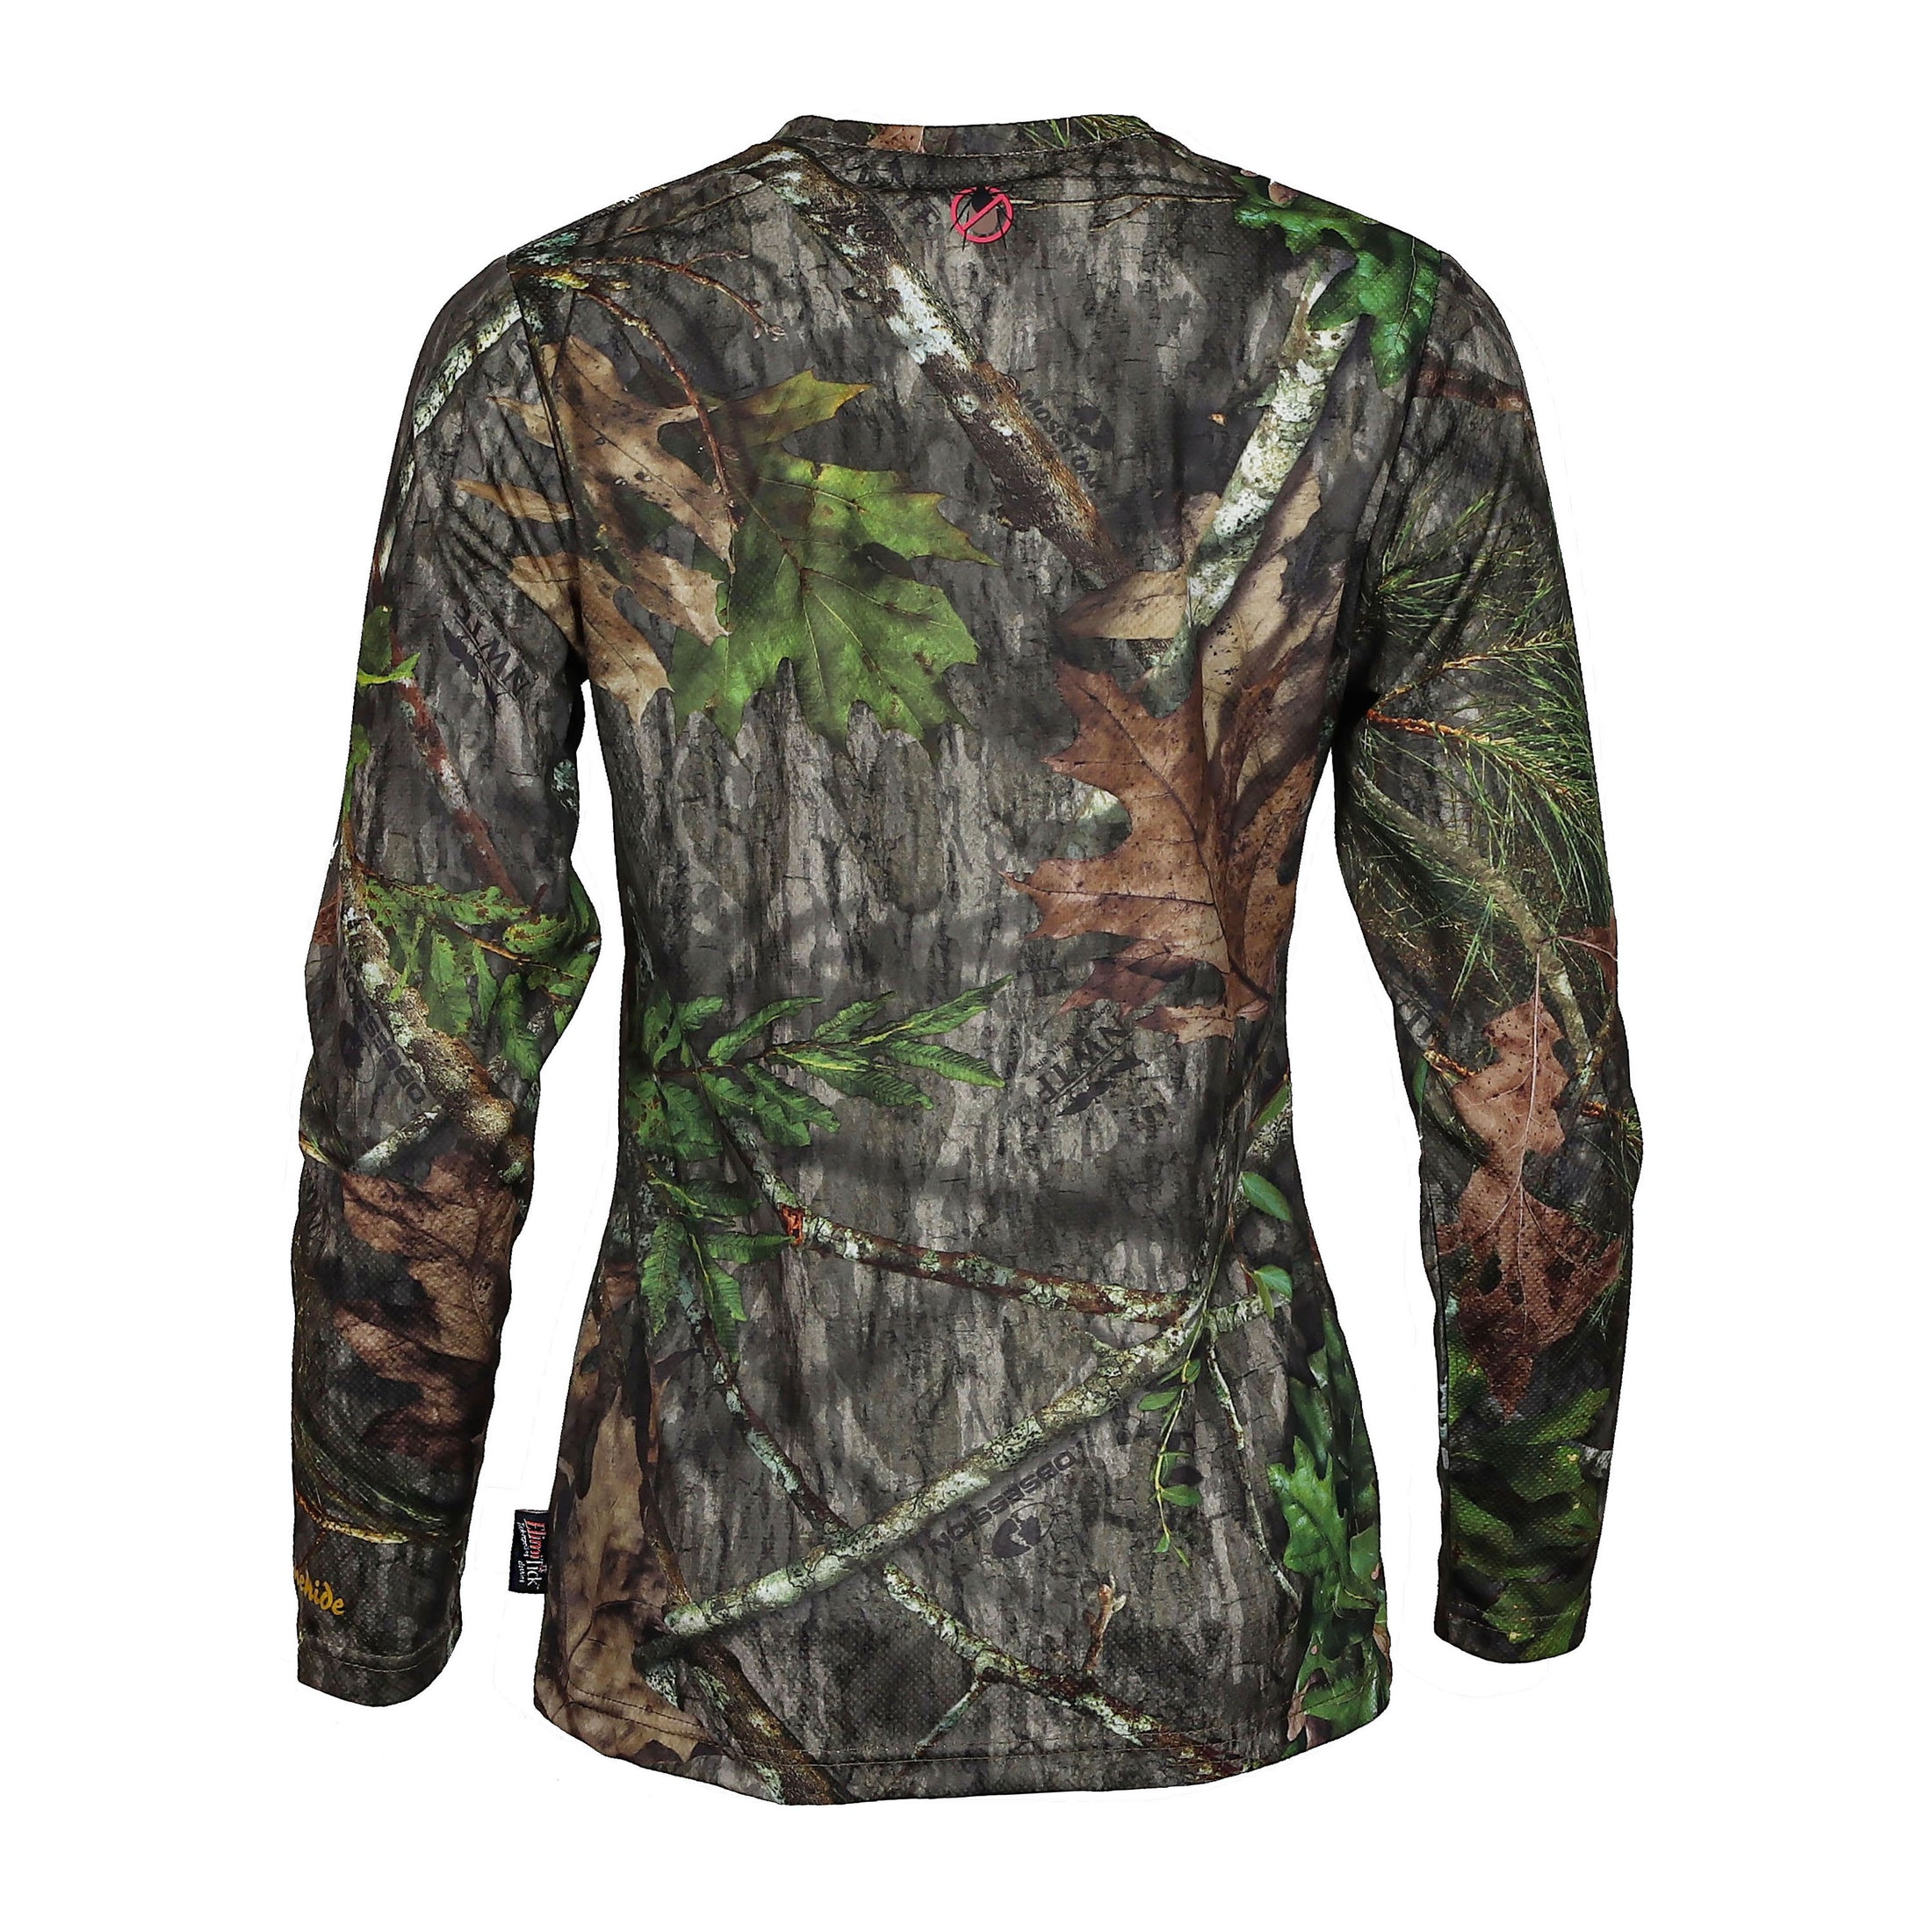 gamehide elimitick womens long sleeve shirt back view (mossy oak obsession)